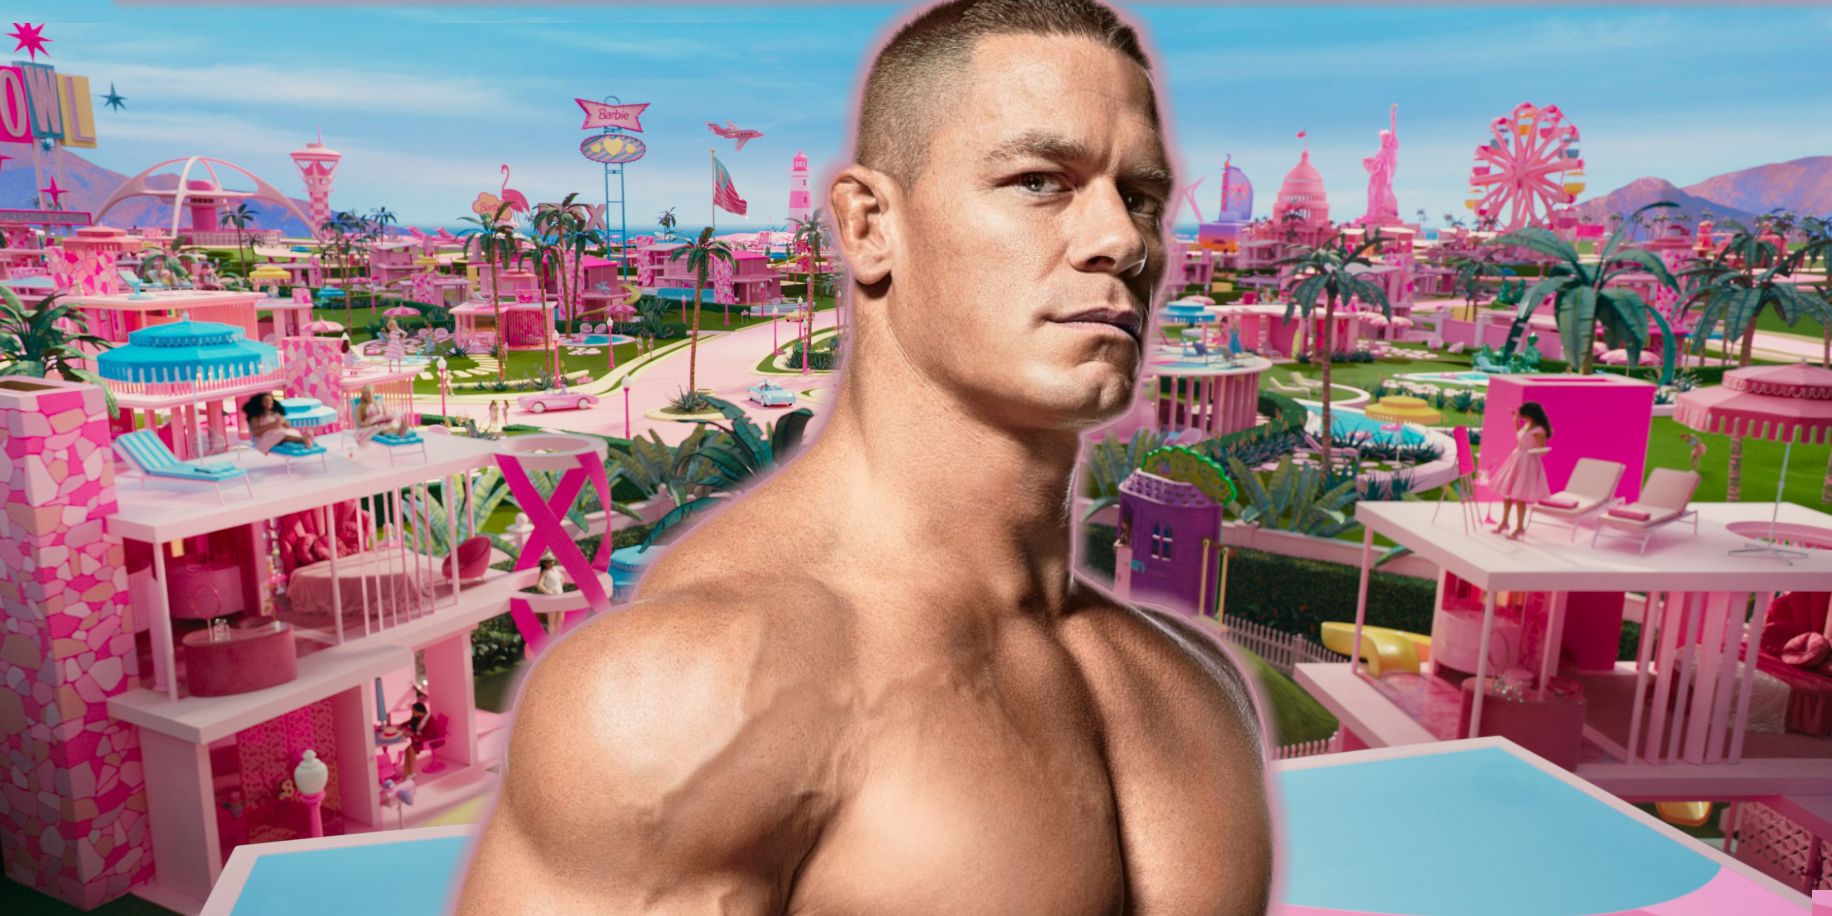 John Cena superimposed on a still from the Barbie movie trailer.